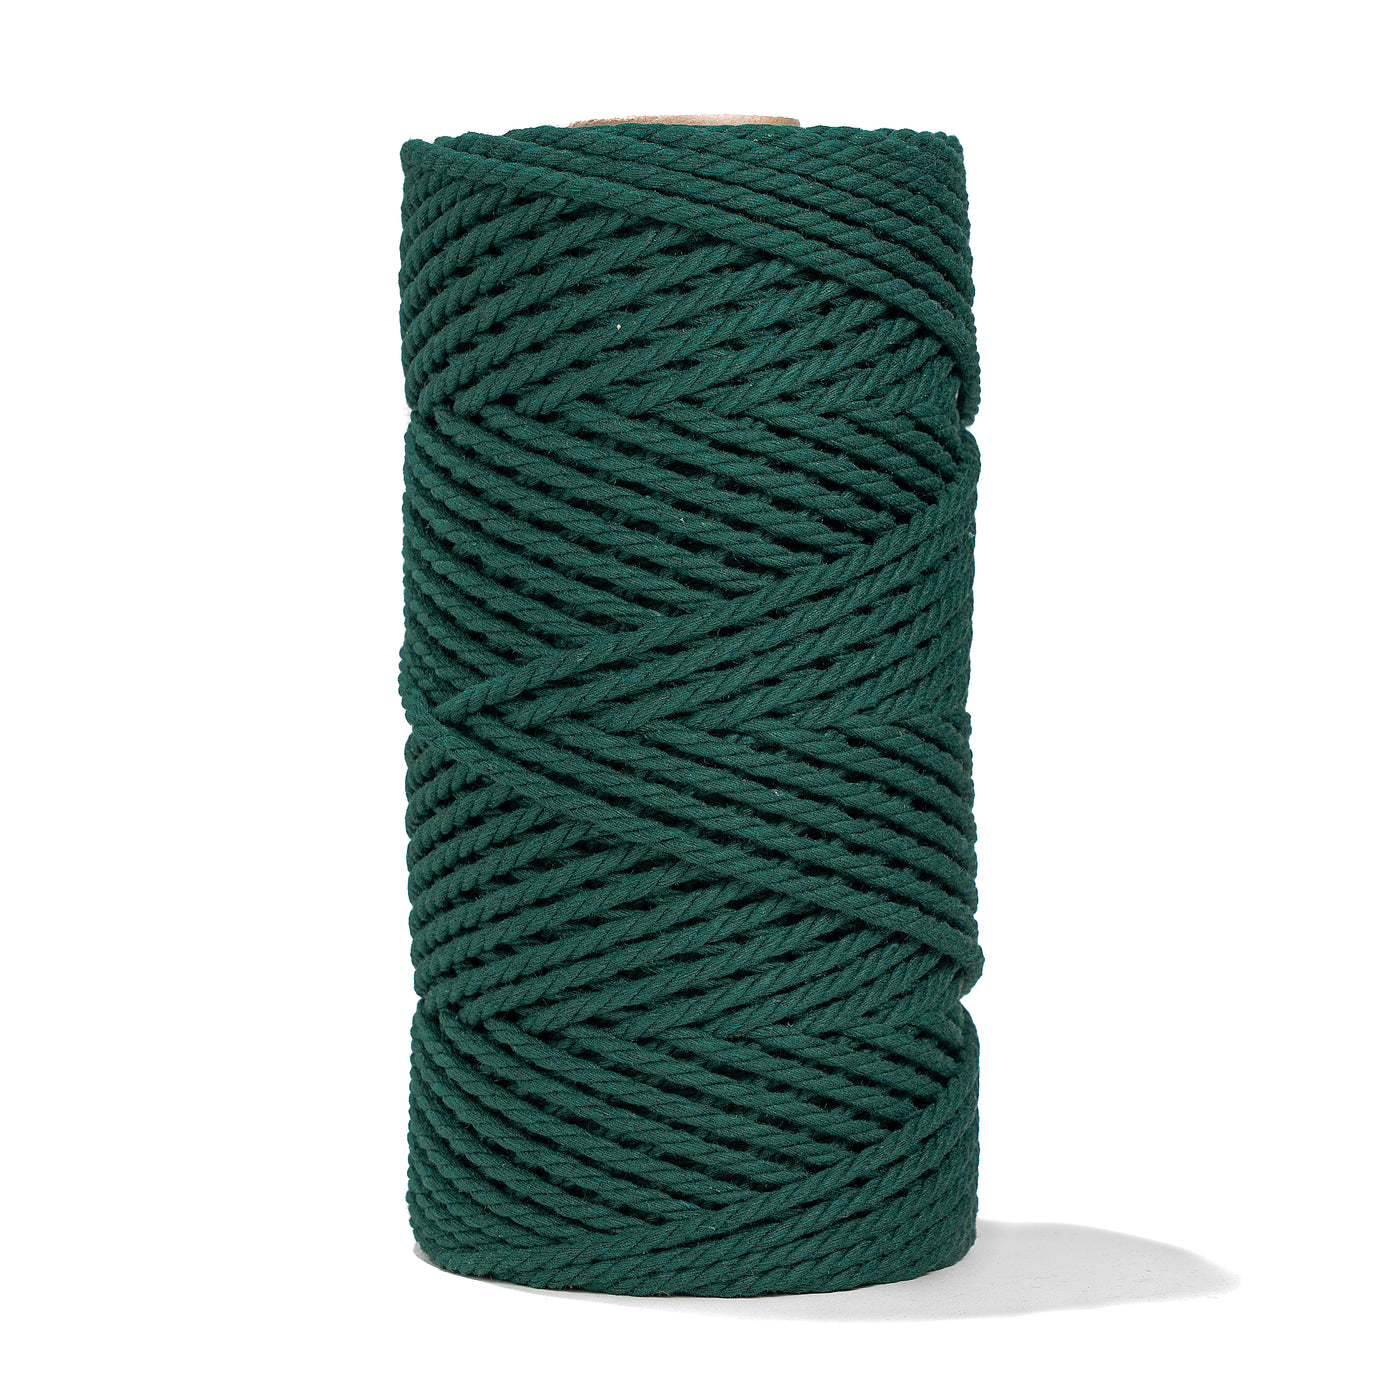 COTTON ROPE ZERO WASTE 3 MM - 3 PLY - FOREST GREEN COLOR